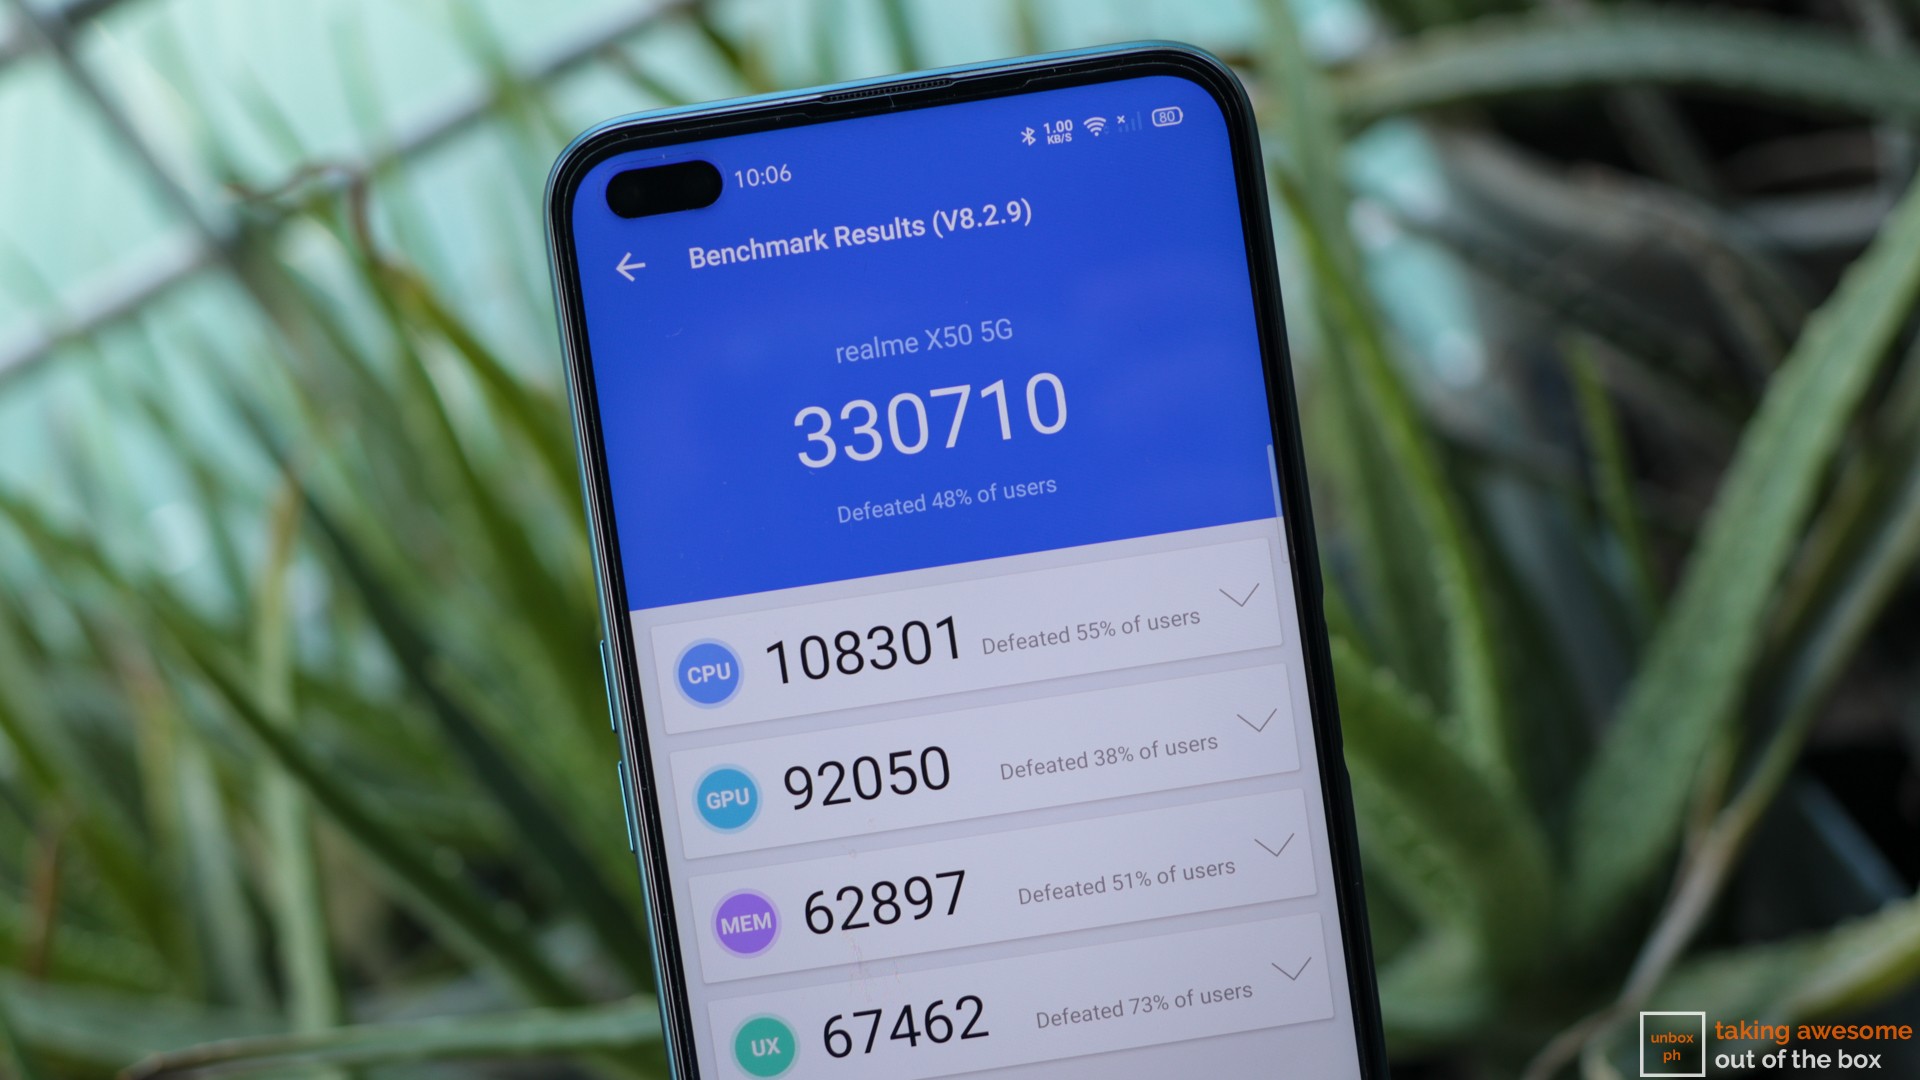 screenshot of the Realme X50 5G benchmark results